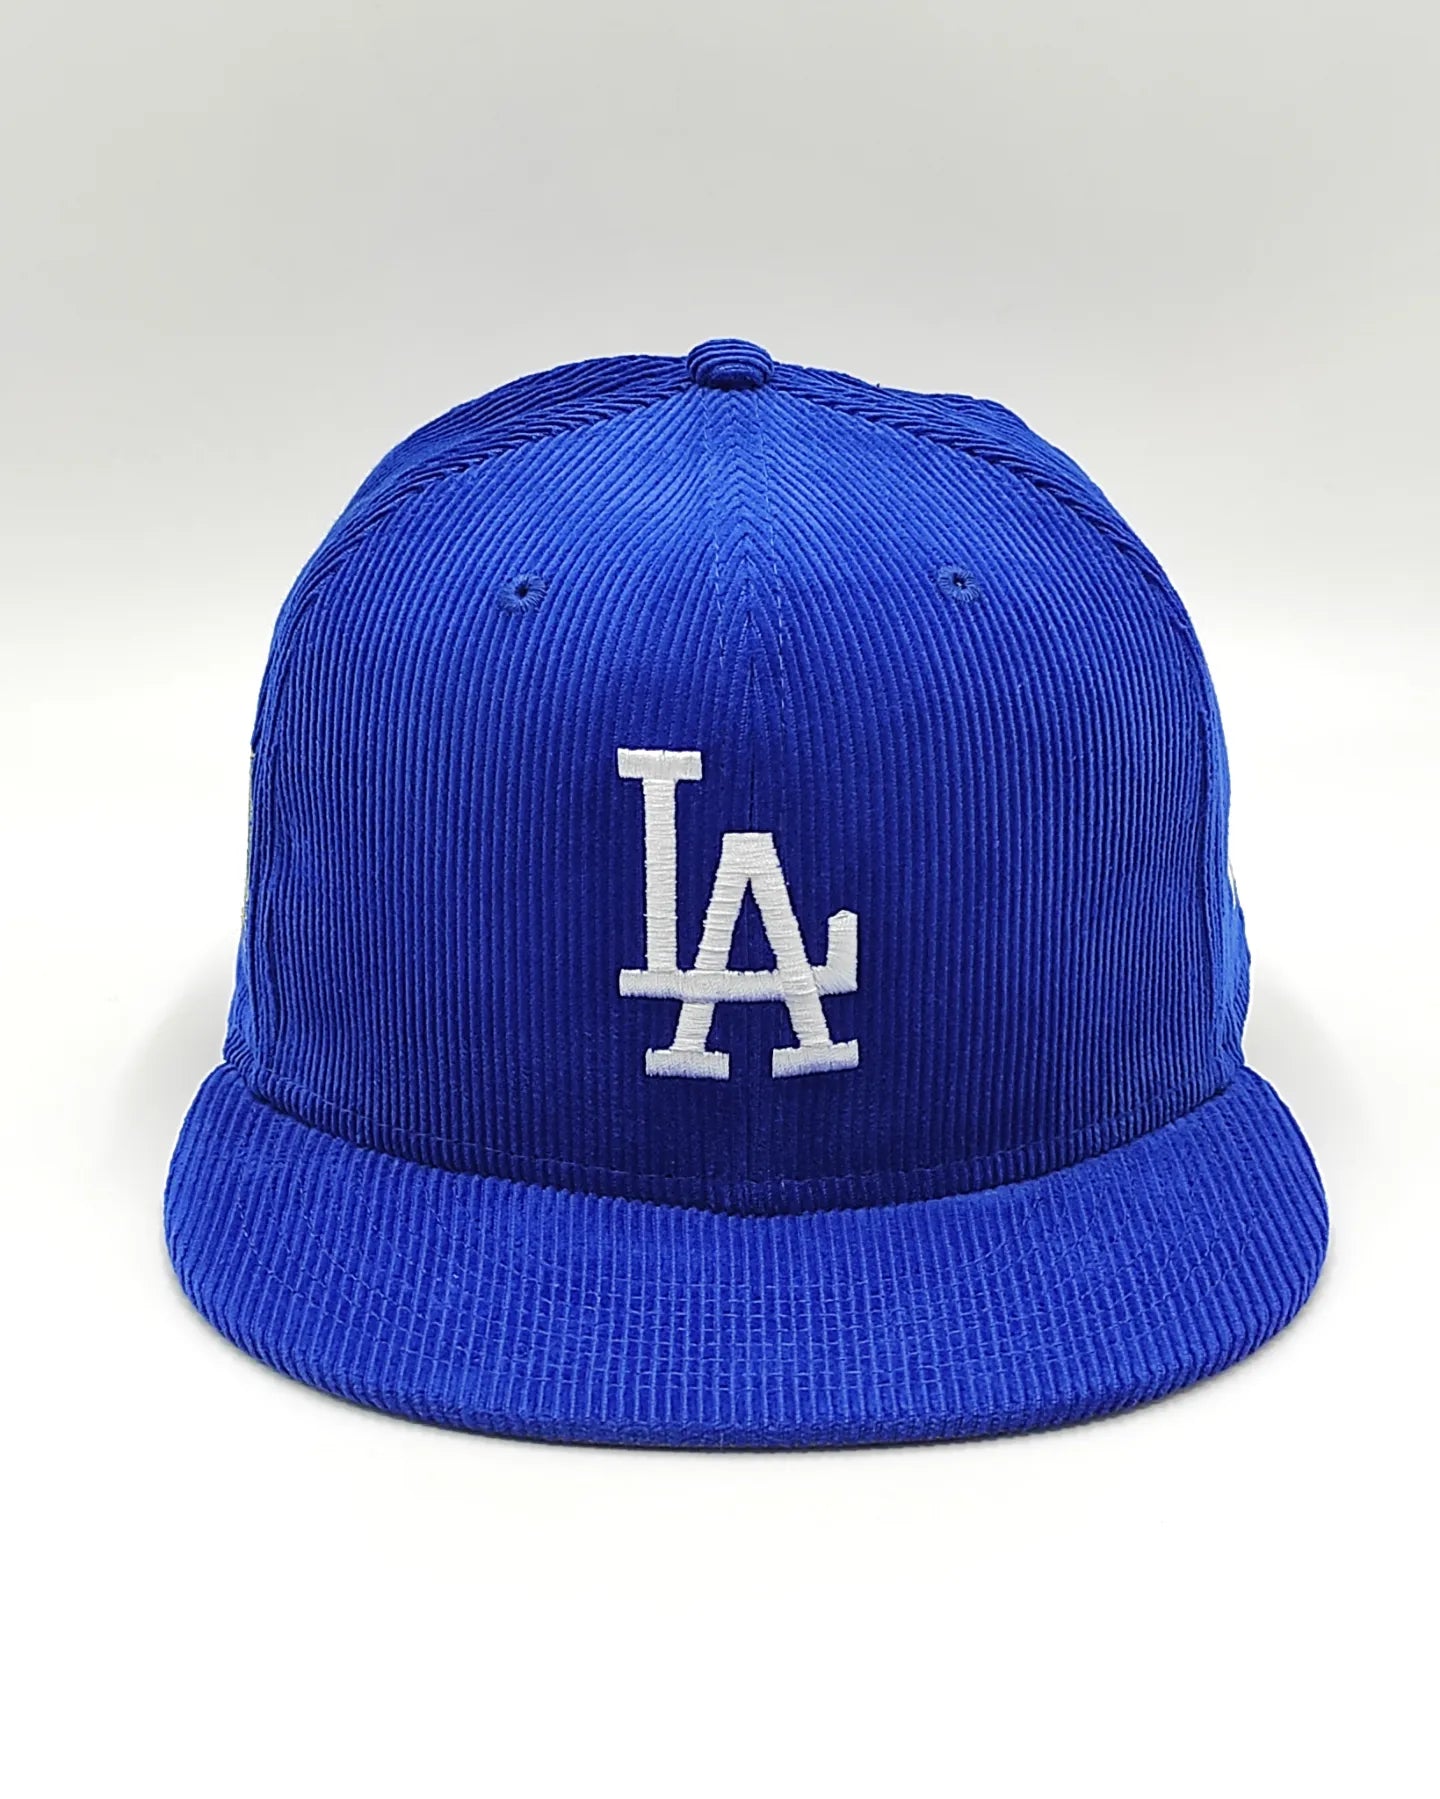 Los Angeles Dodgers OLD SCHOOL CORDUROY SIDE-PATCH Black Fitted Hat by New Era